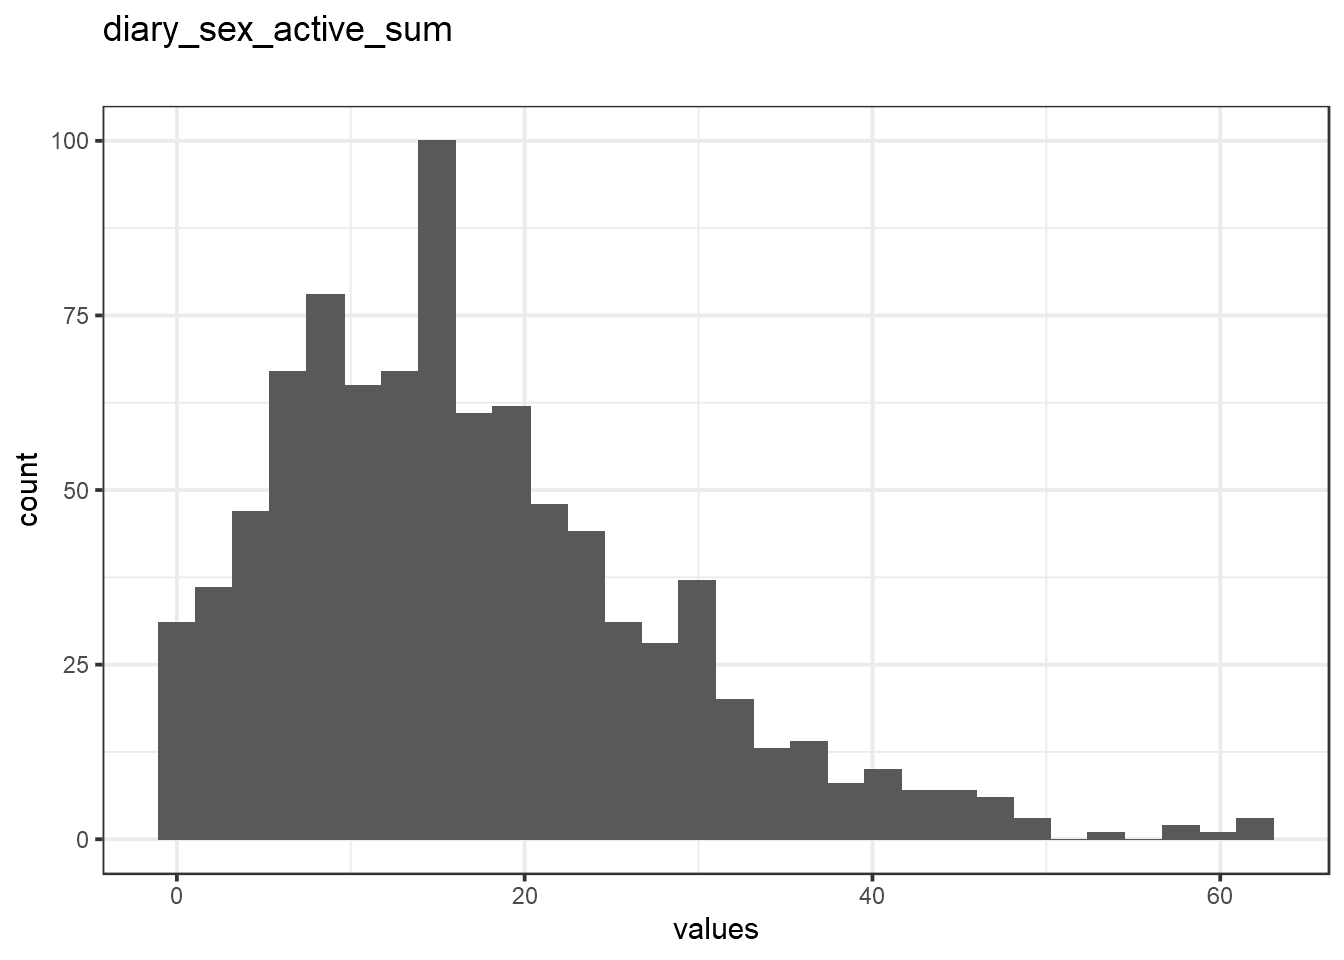 Distribution of values for diary_sex_active_sum